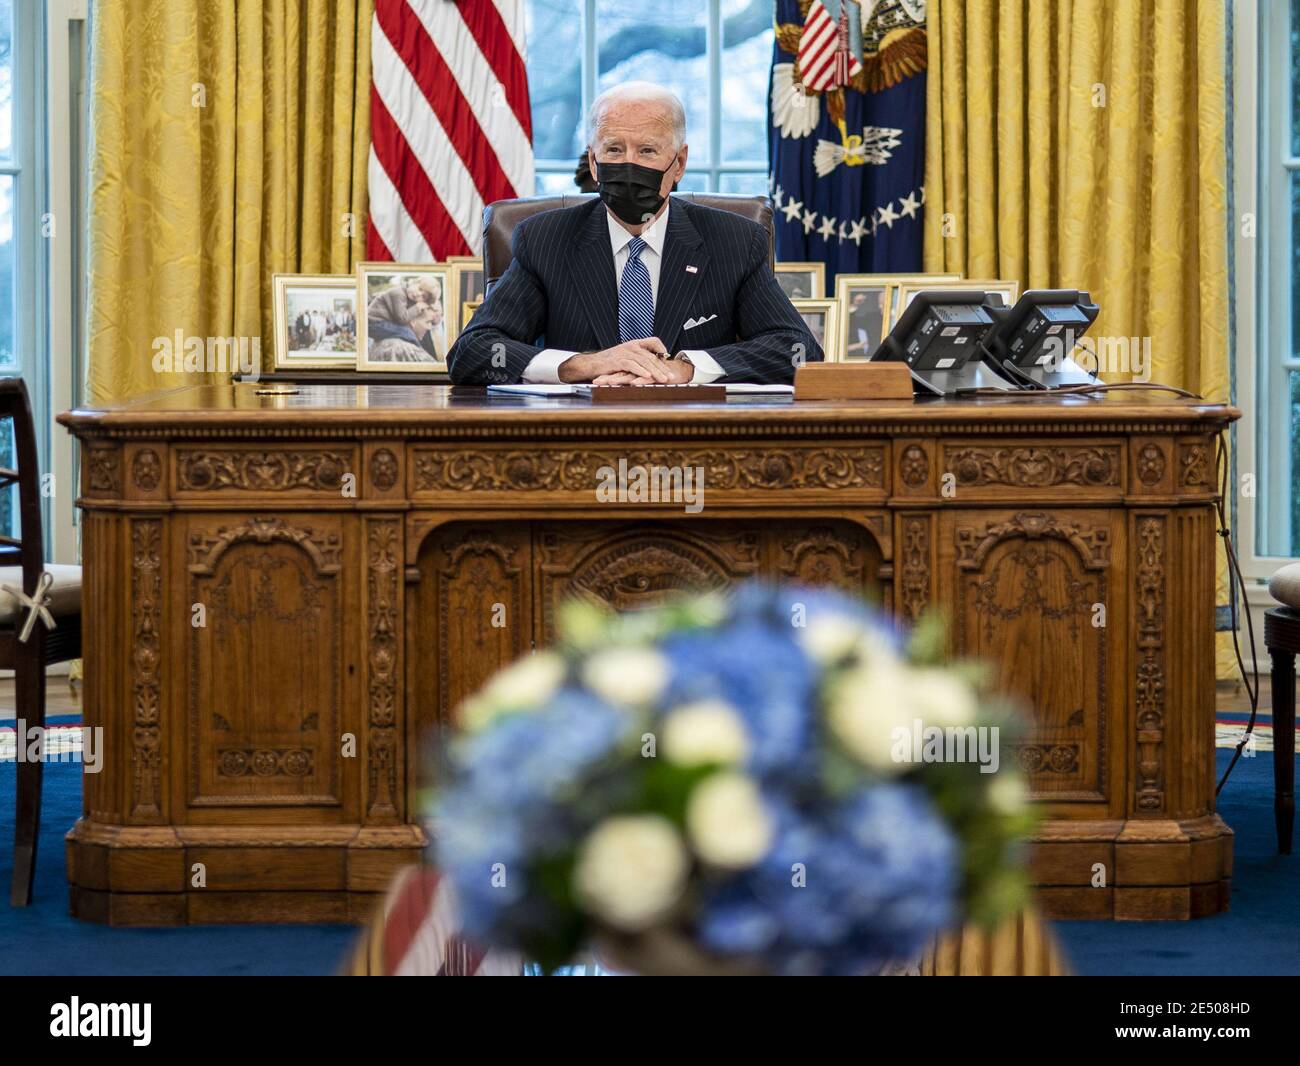 Washington, United States. 25th Jan, 2021. President Joe Biden signs an executive order reversing a Trump era ban on transgender serving in the military, in the Oval Office at the White House, Monday, January 25, 2021in Washington, DC. Pool Photo by Doug Mills/UPI Credit: UPI/Alamy Live News Stock Photo